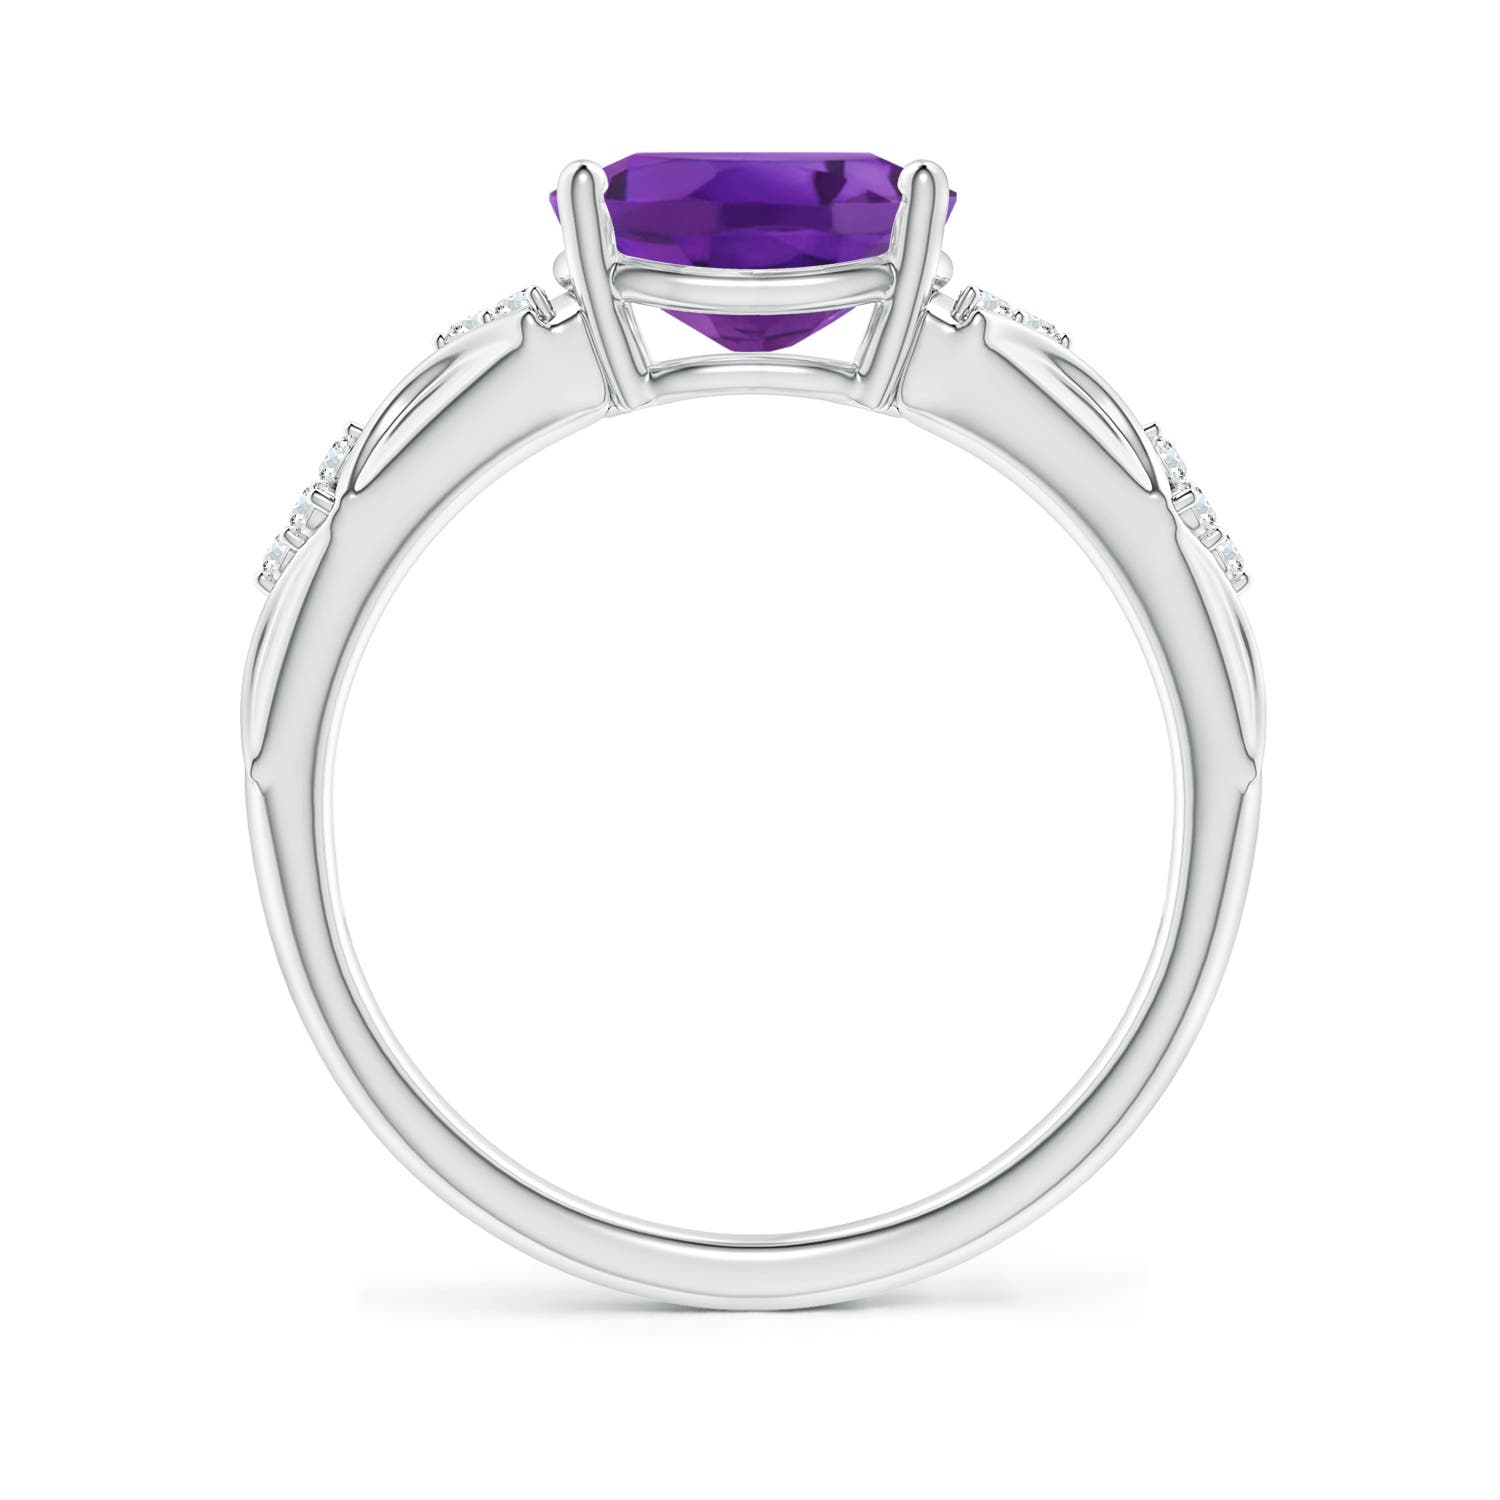 AAA - Amethyst / 1.68 CT / 14 KT White Gold